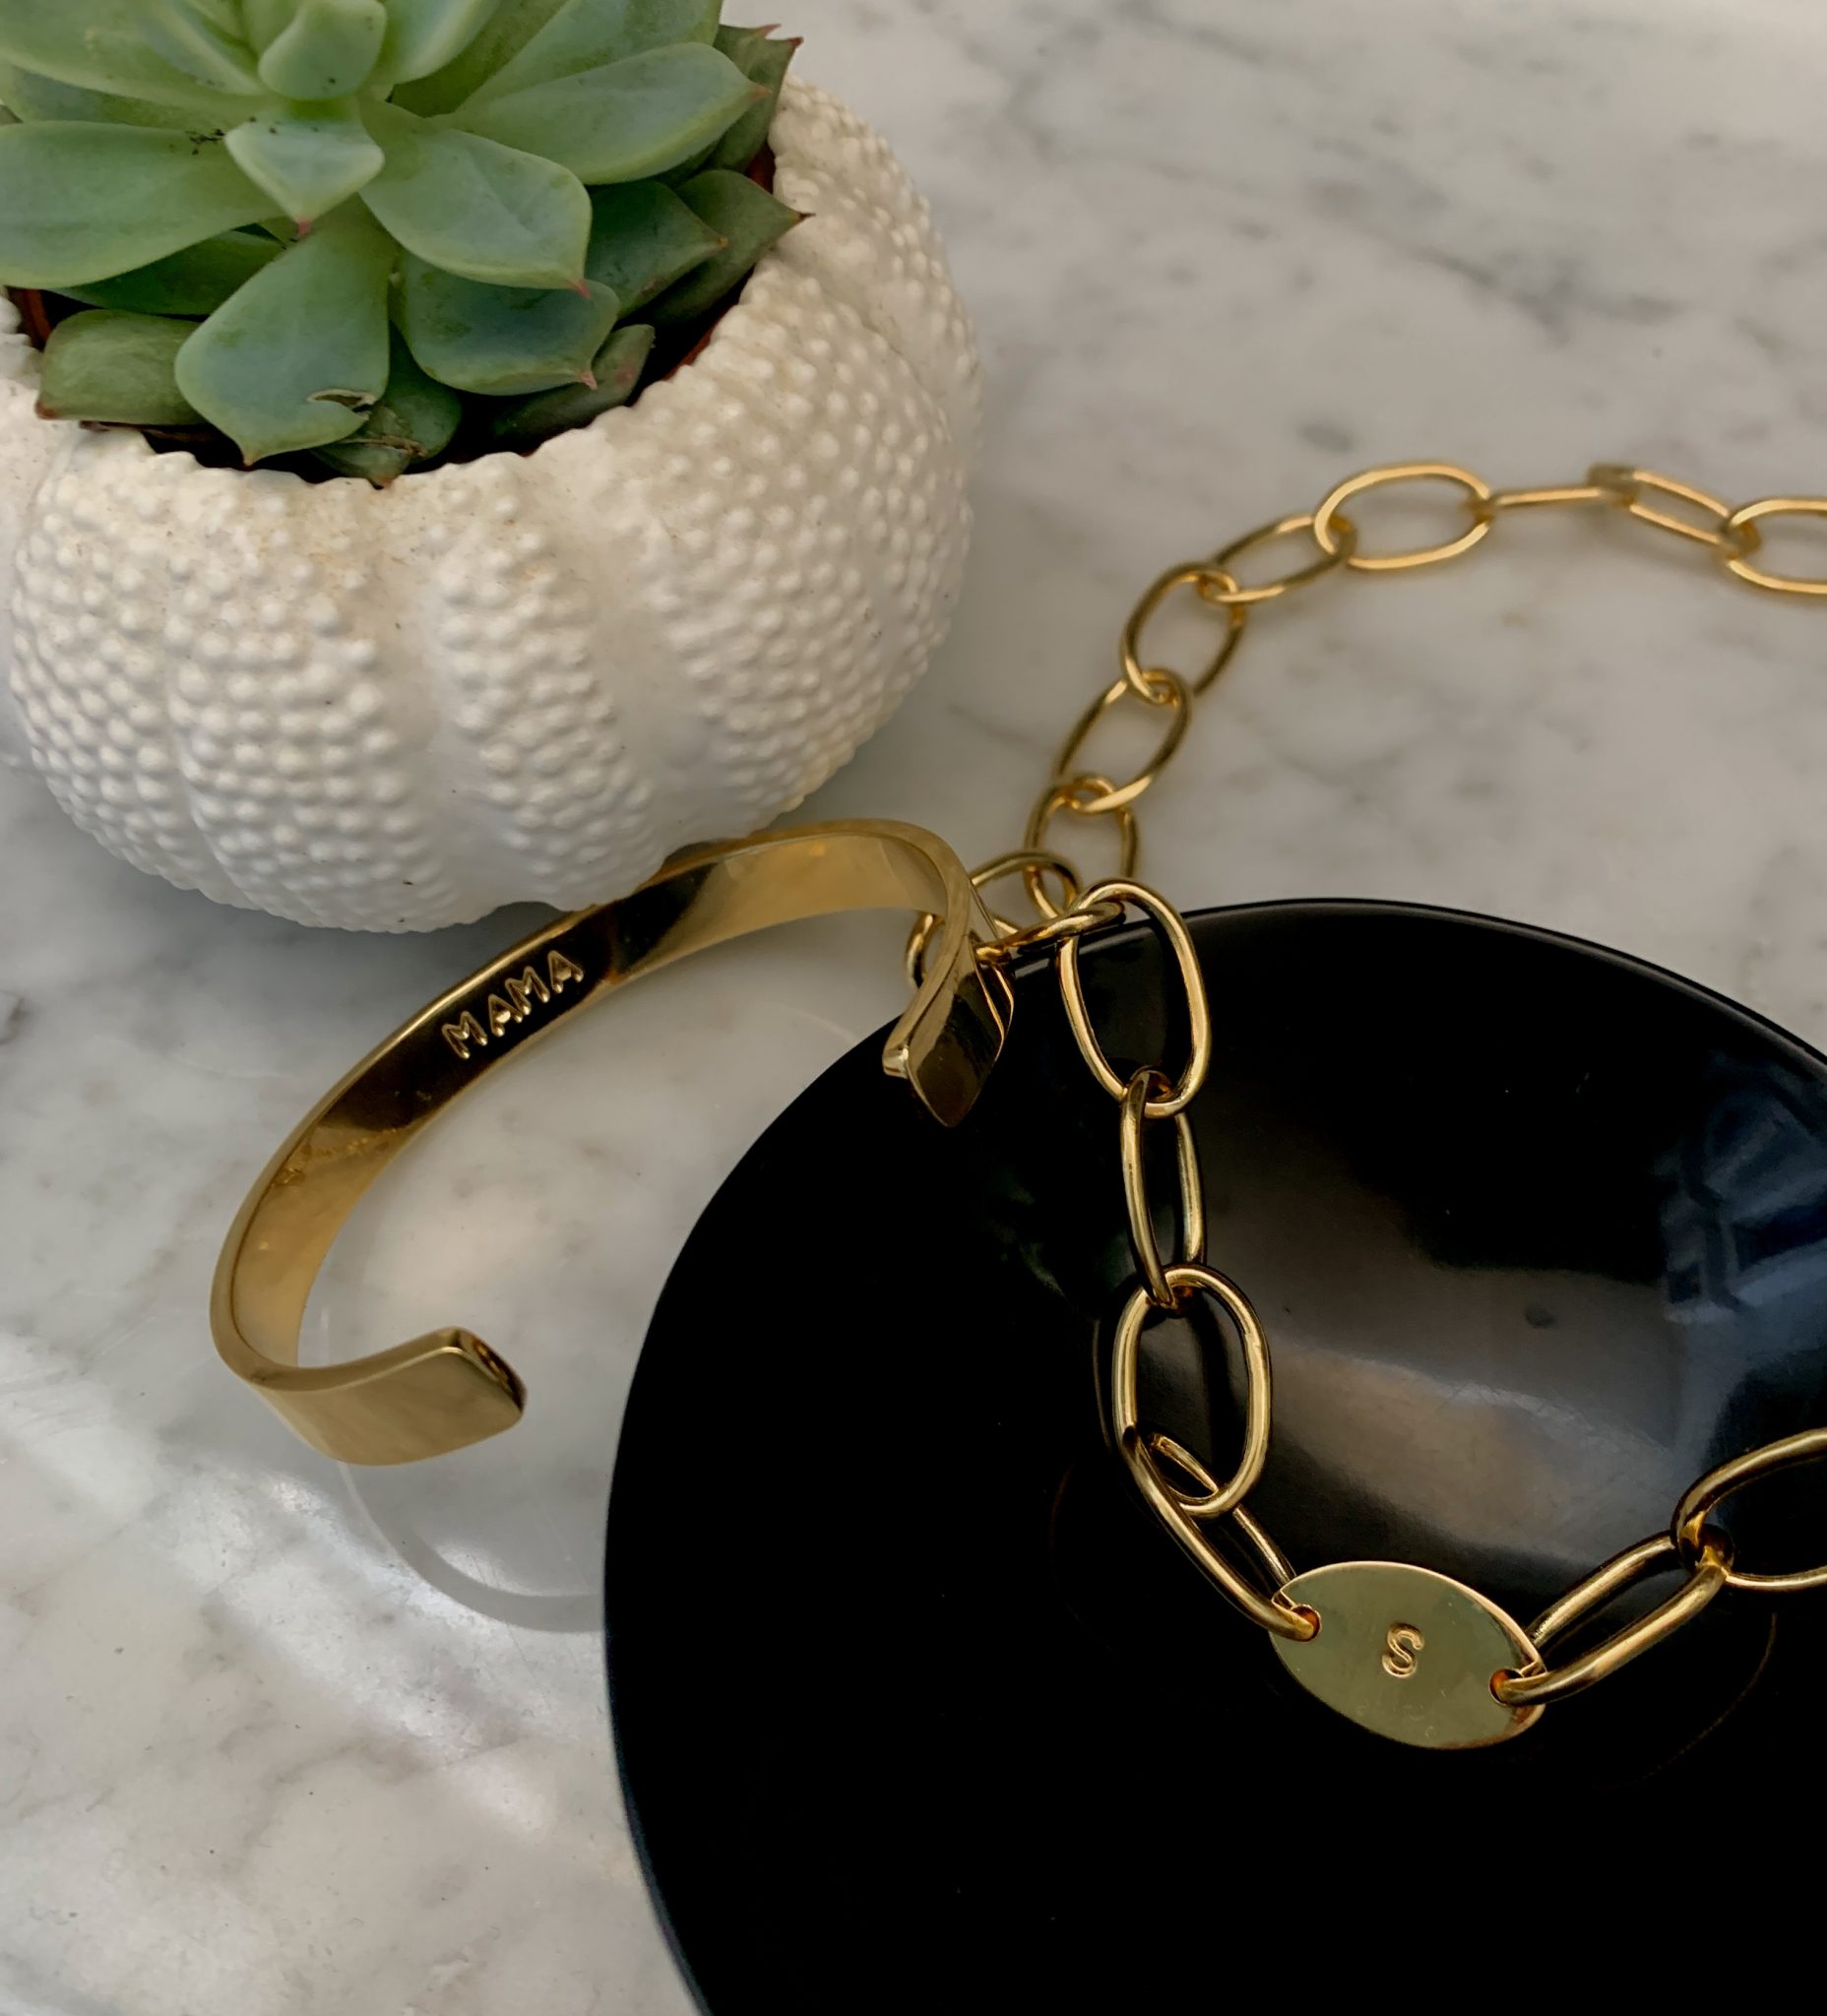 soko jewelry is sustainable and ethical and the perfect mother's day 2022 gift